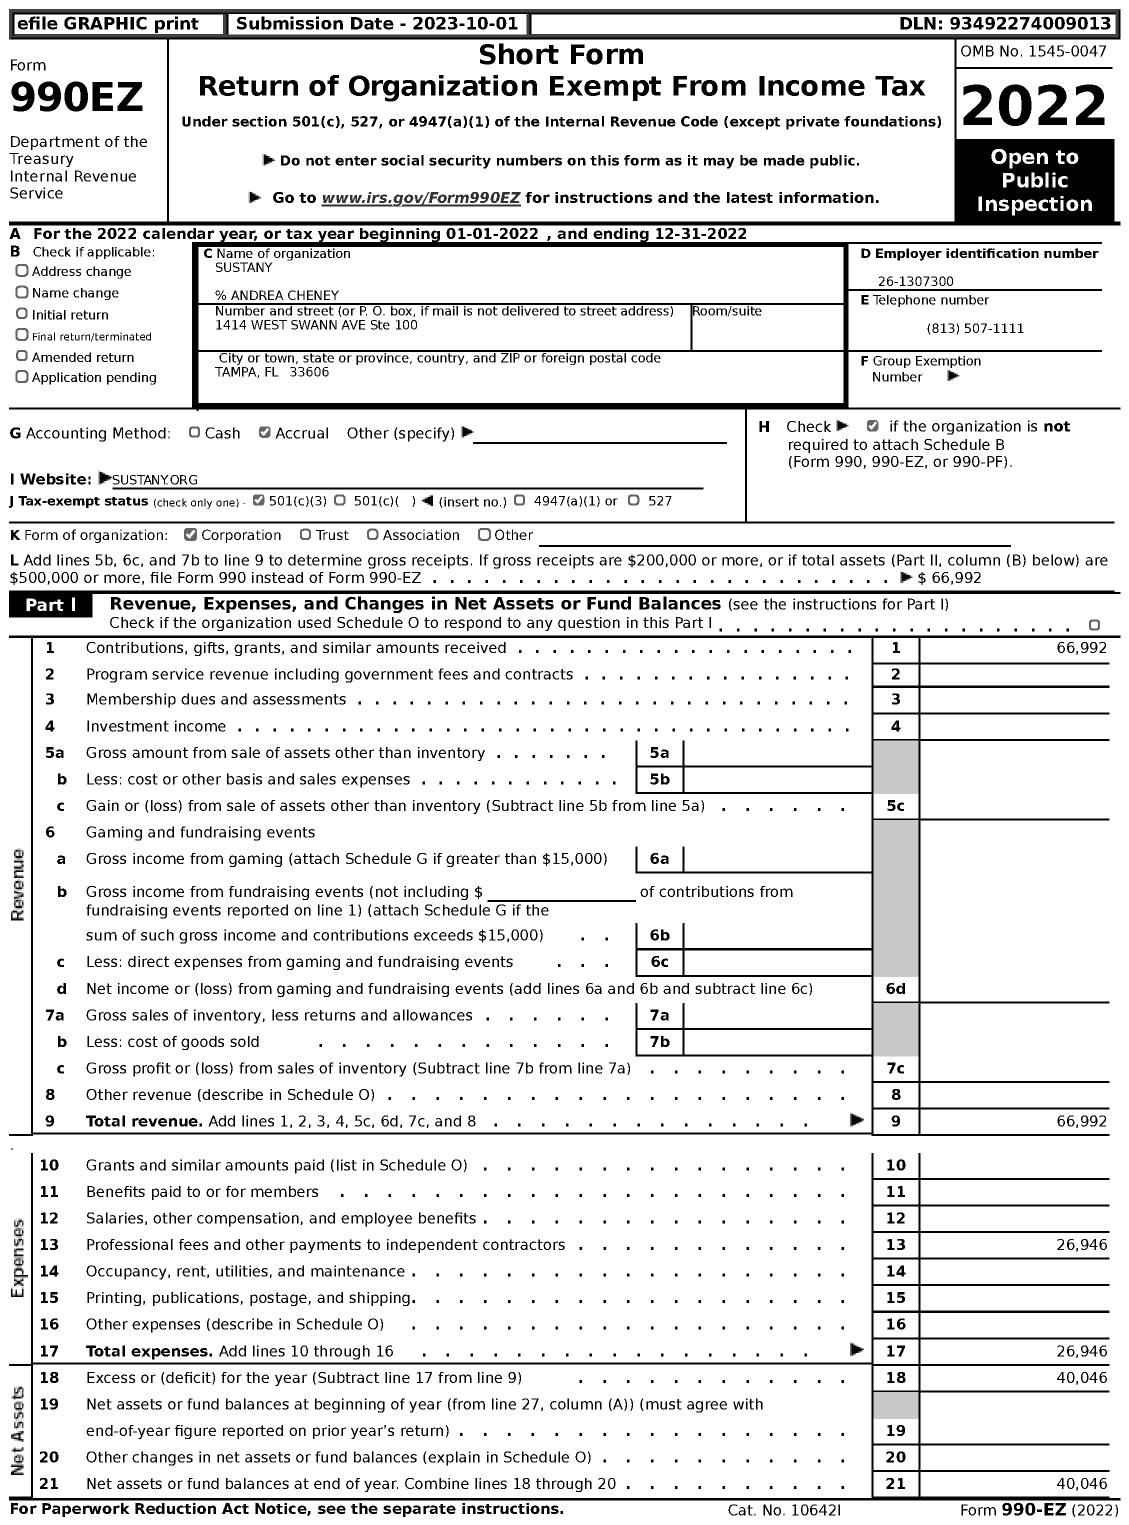 Image of first page of 2022 Form 990EZ for Sustany